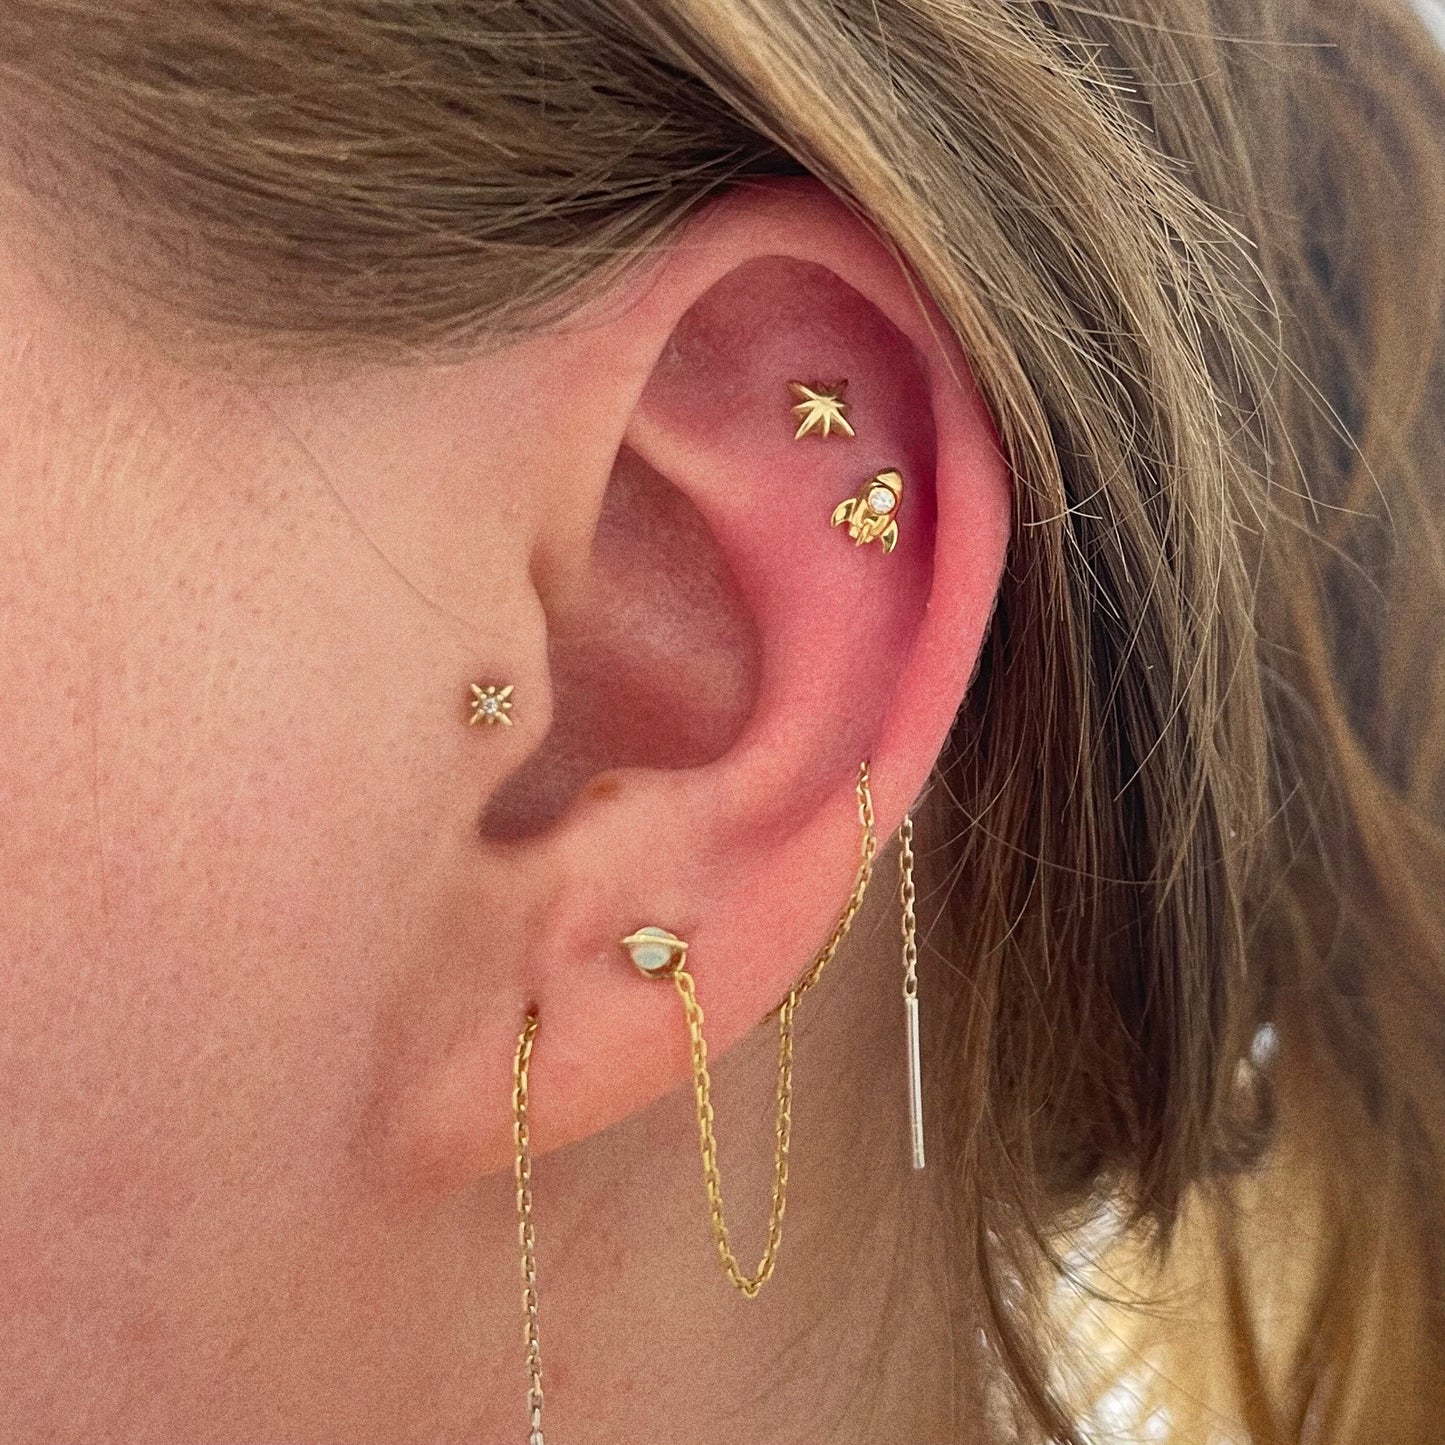 Ear Mapping (2 or more piercings)